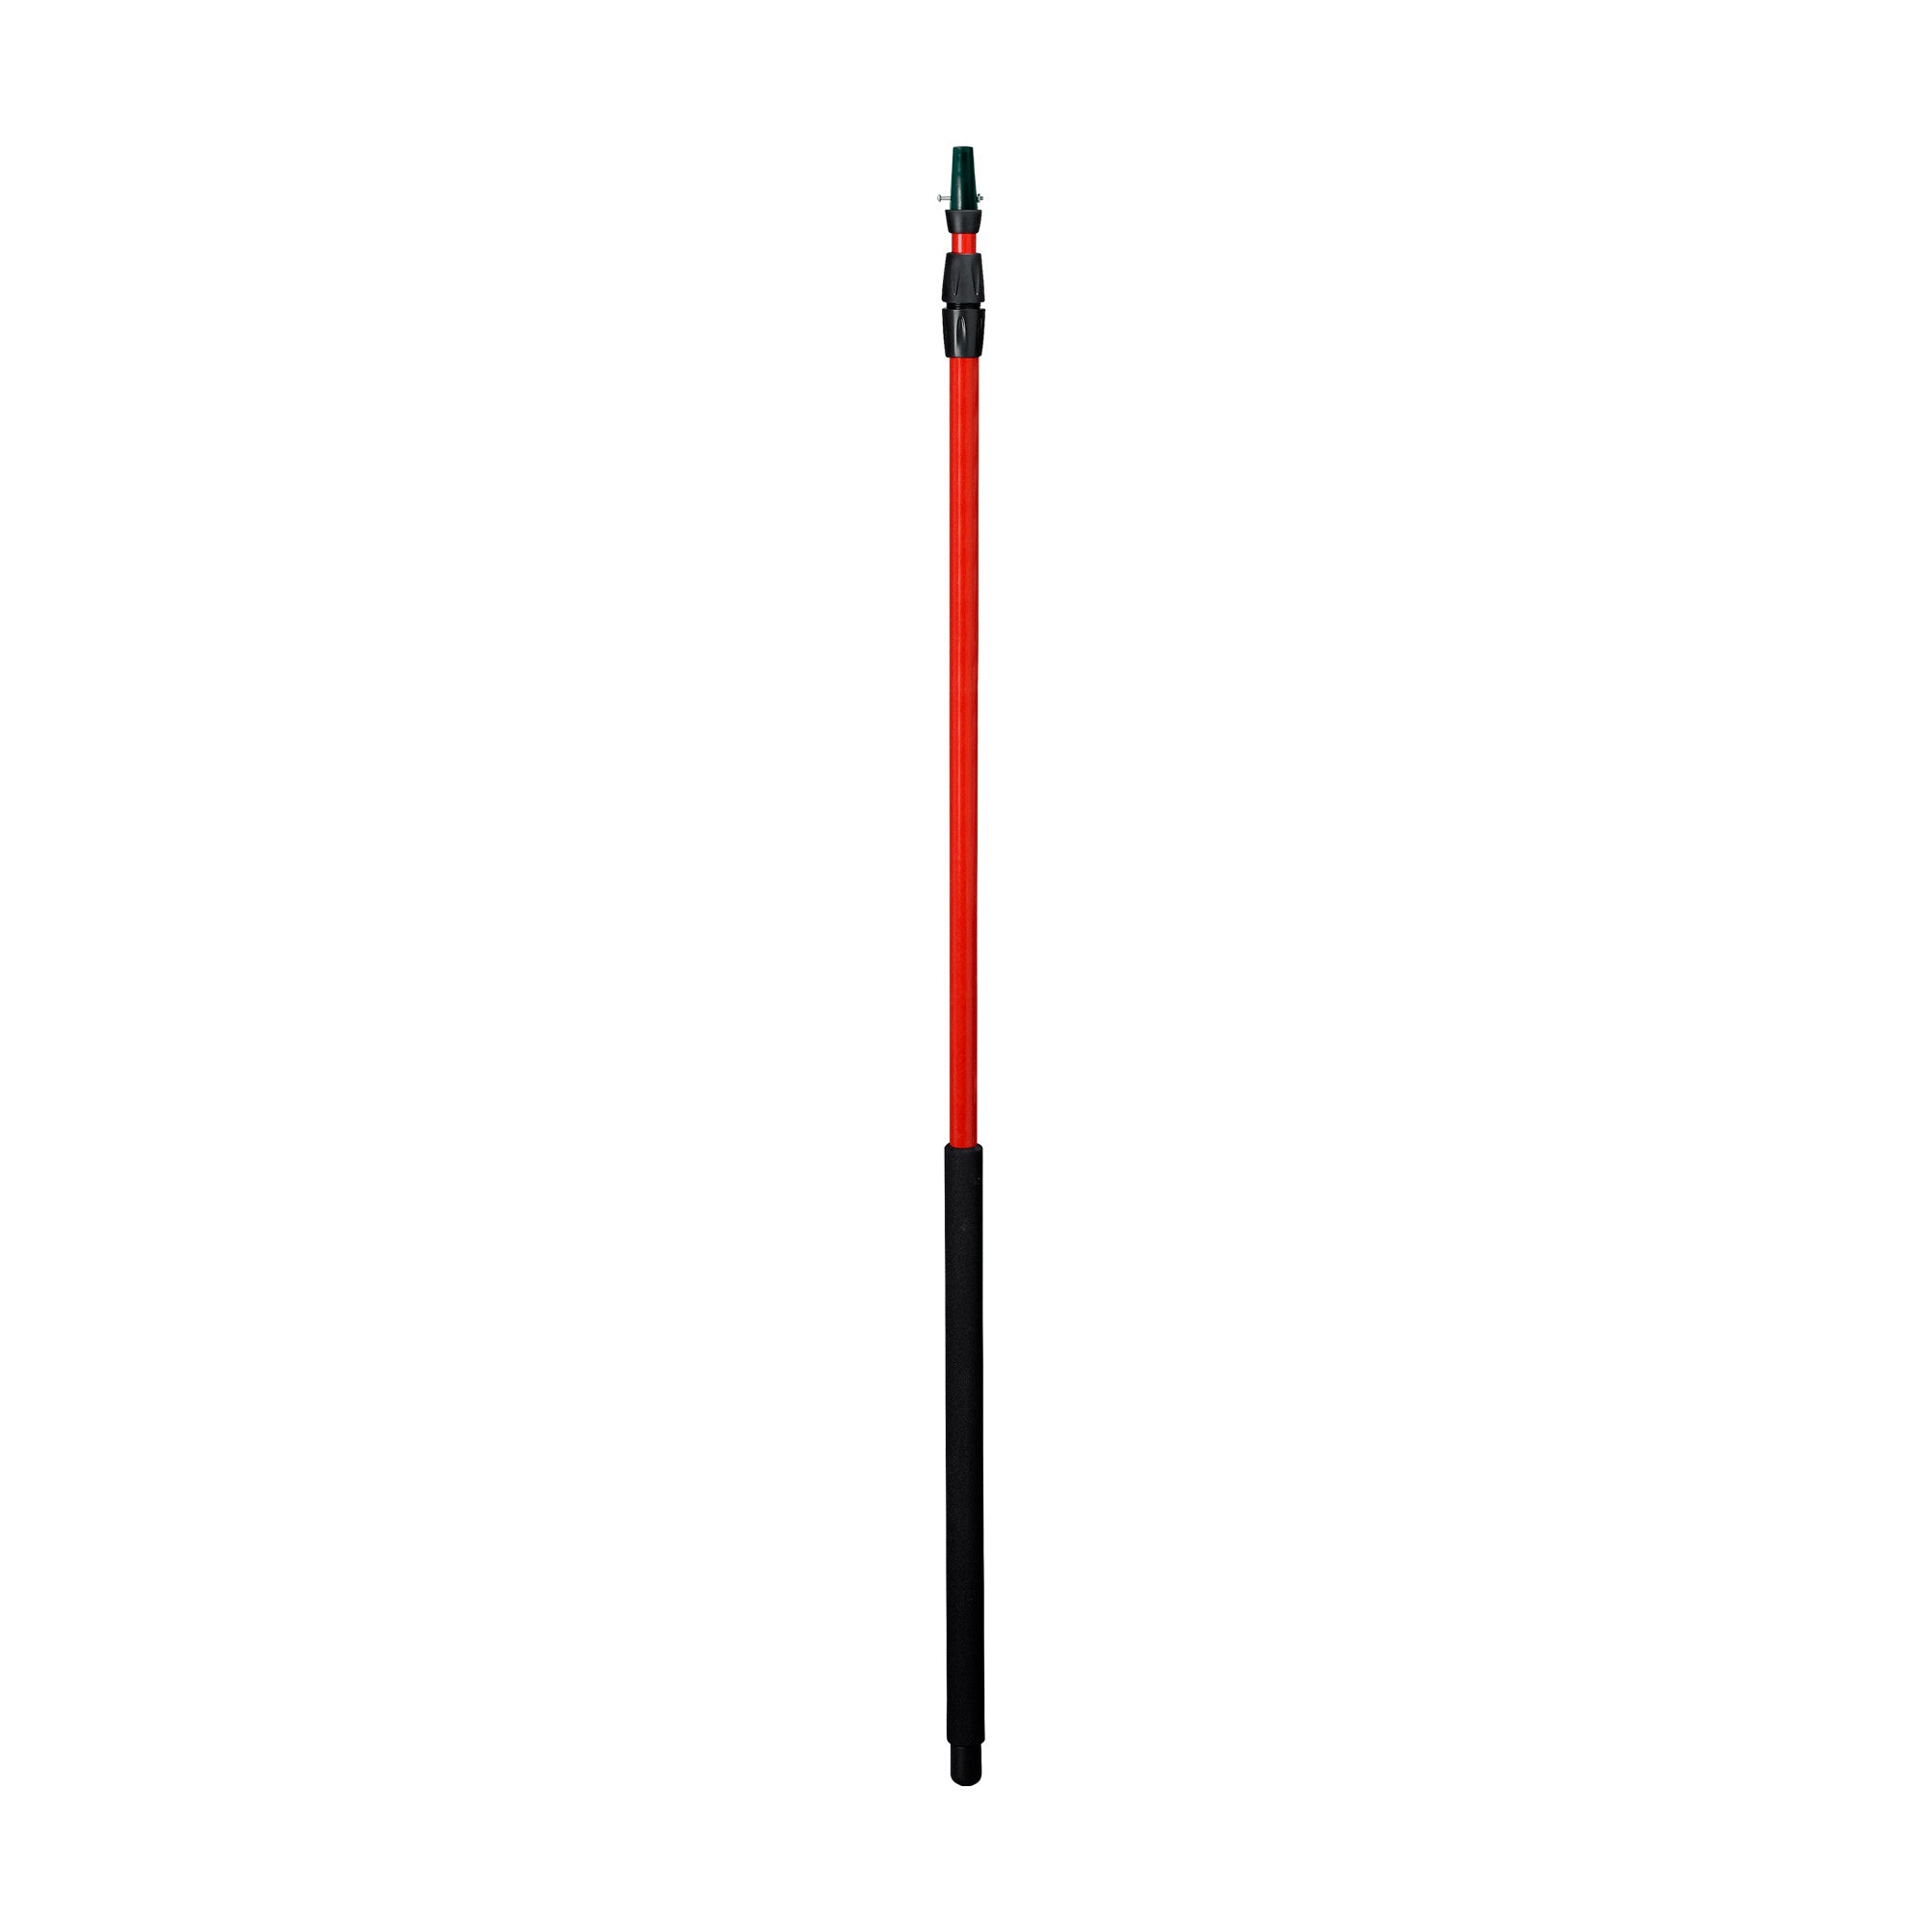 12 ft. Replacement Pole for Tree Pruner